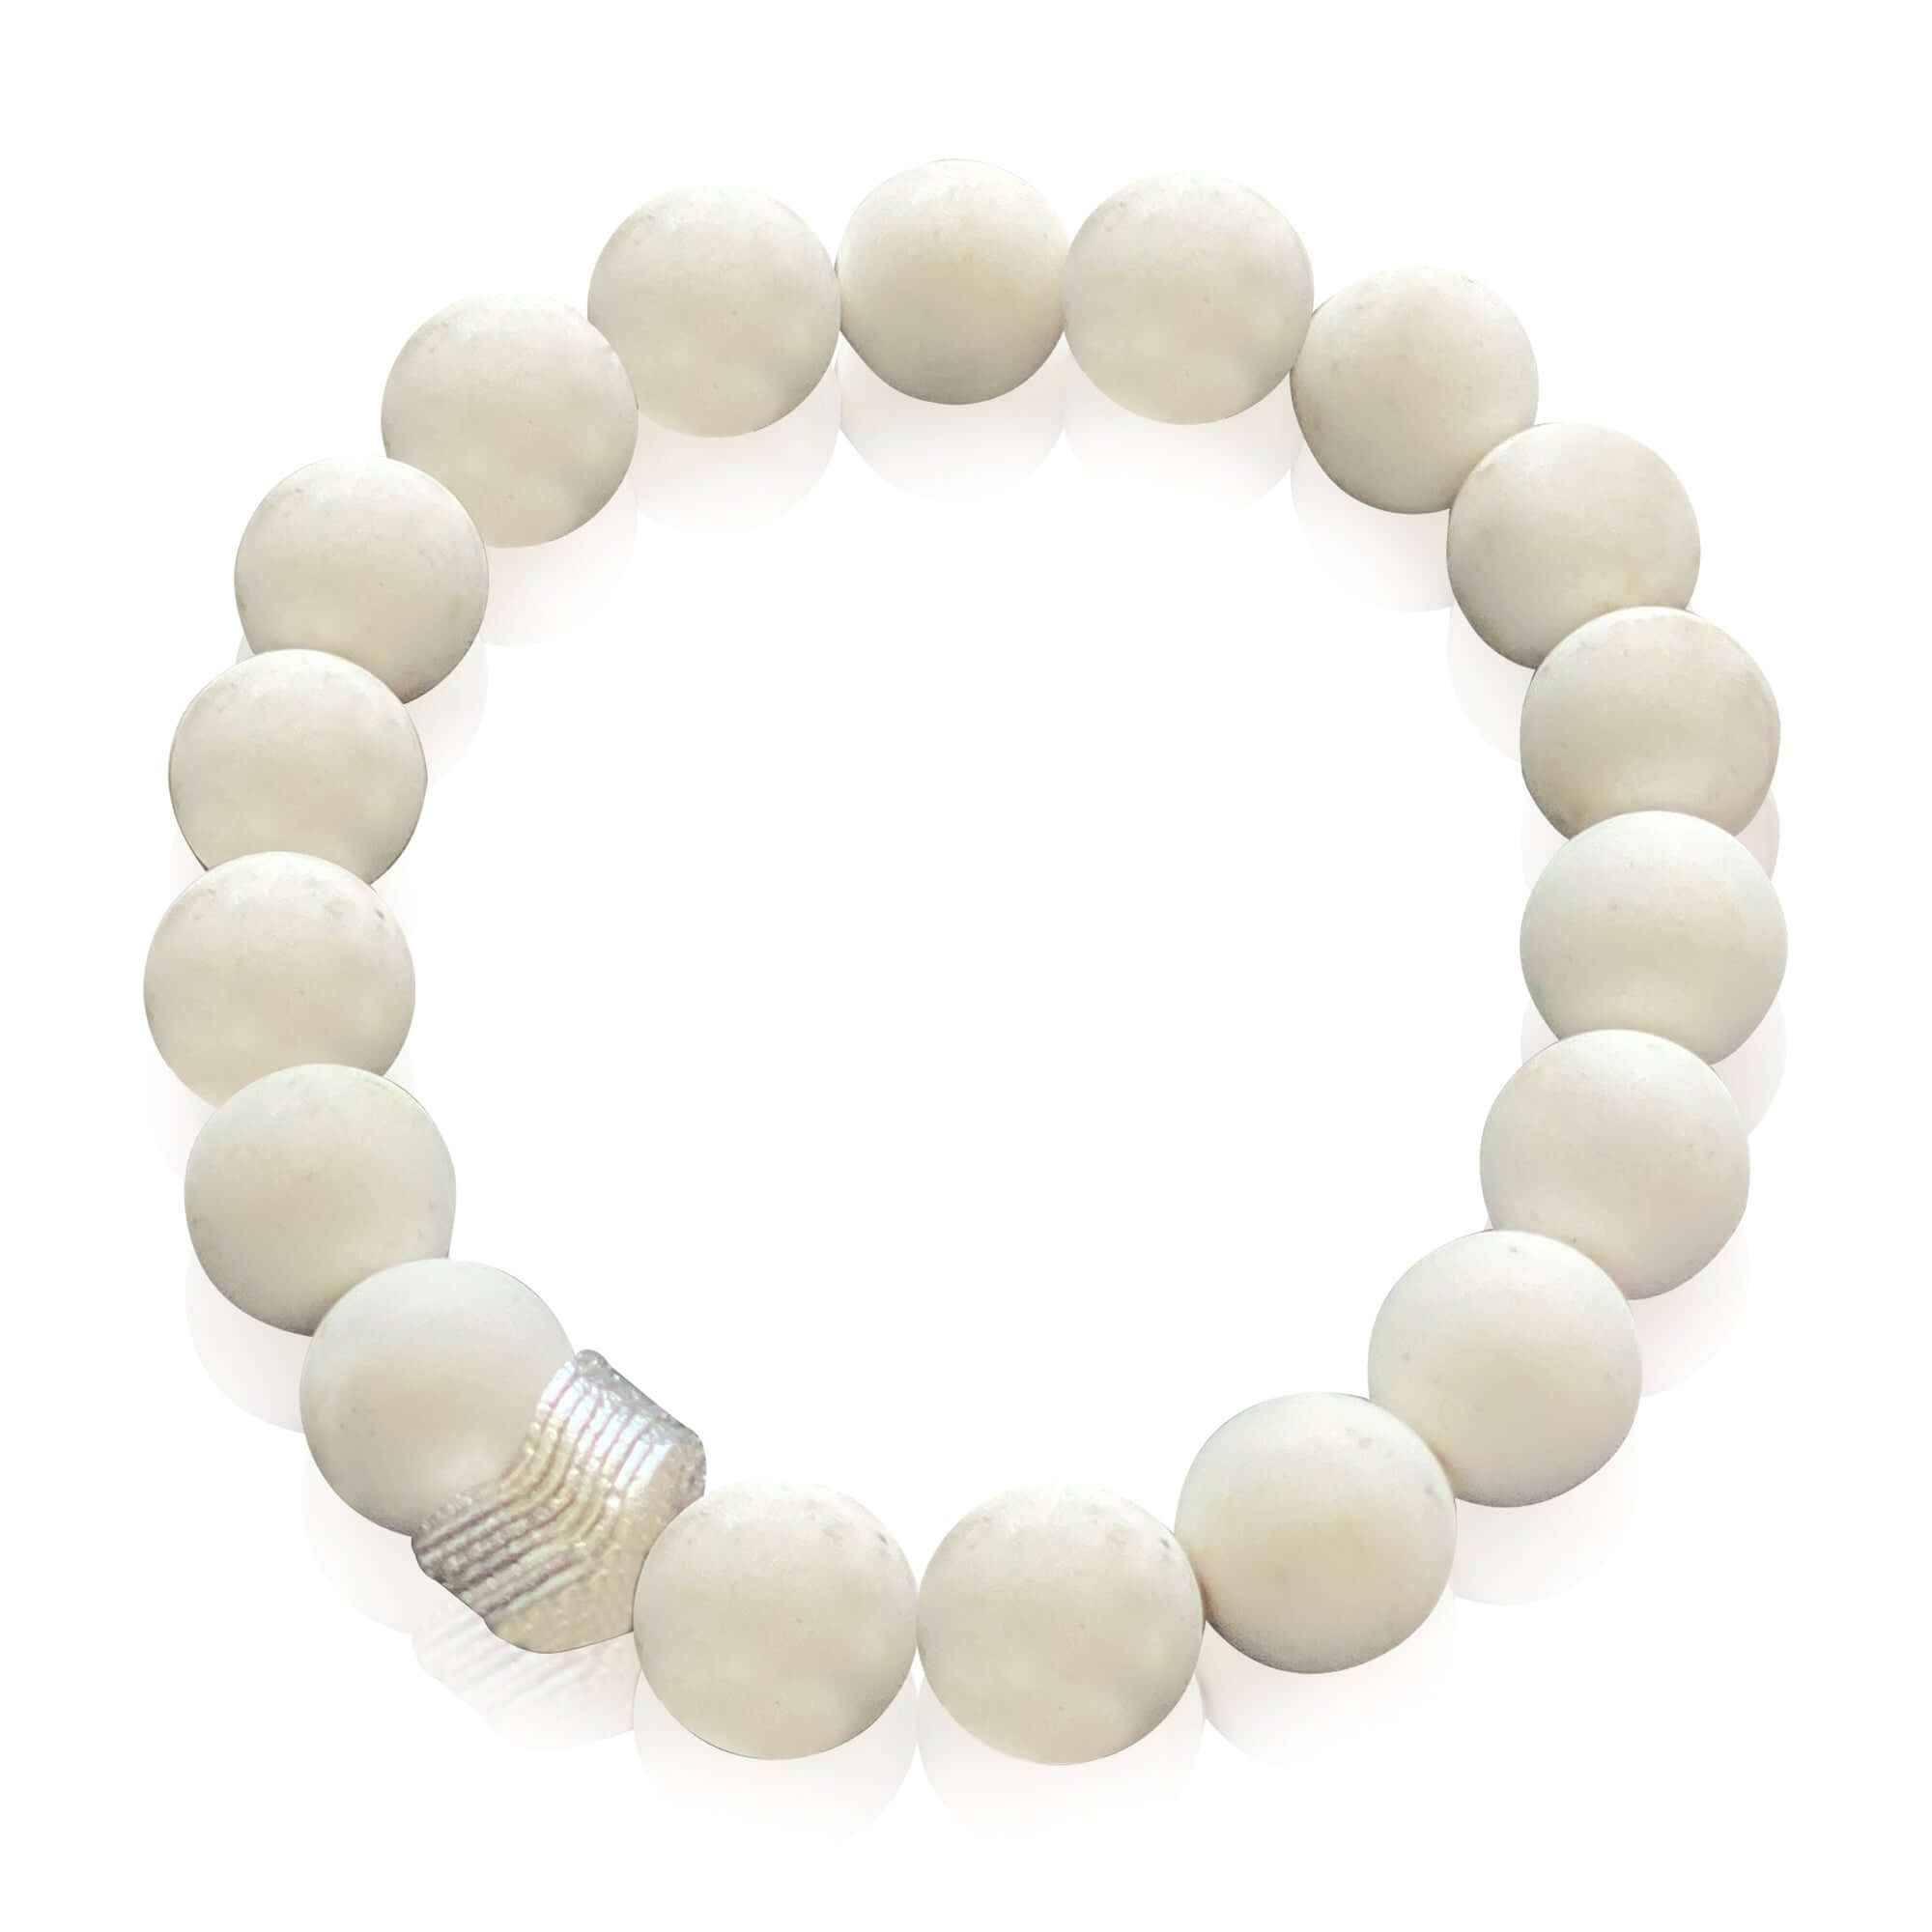 Versatile Howlite Bracelet with Silver Ruffle Spacers representing everyday style.